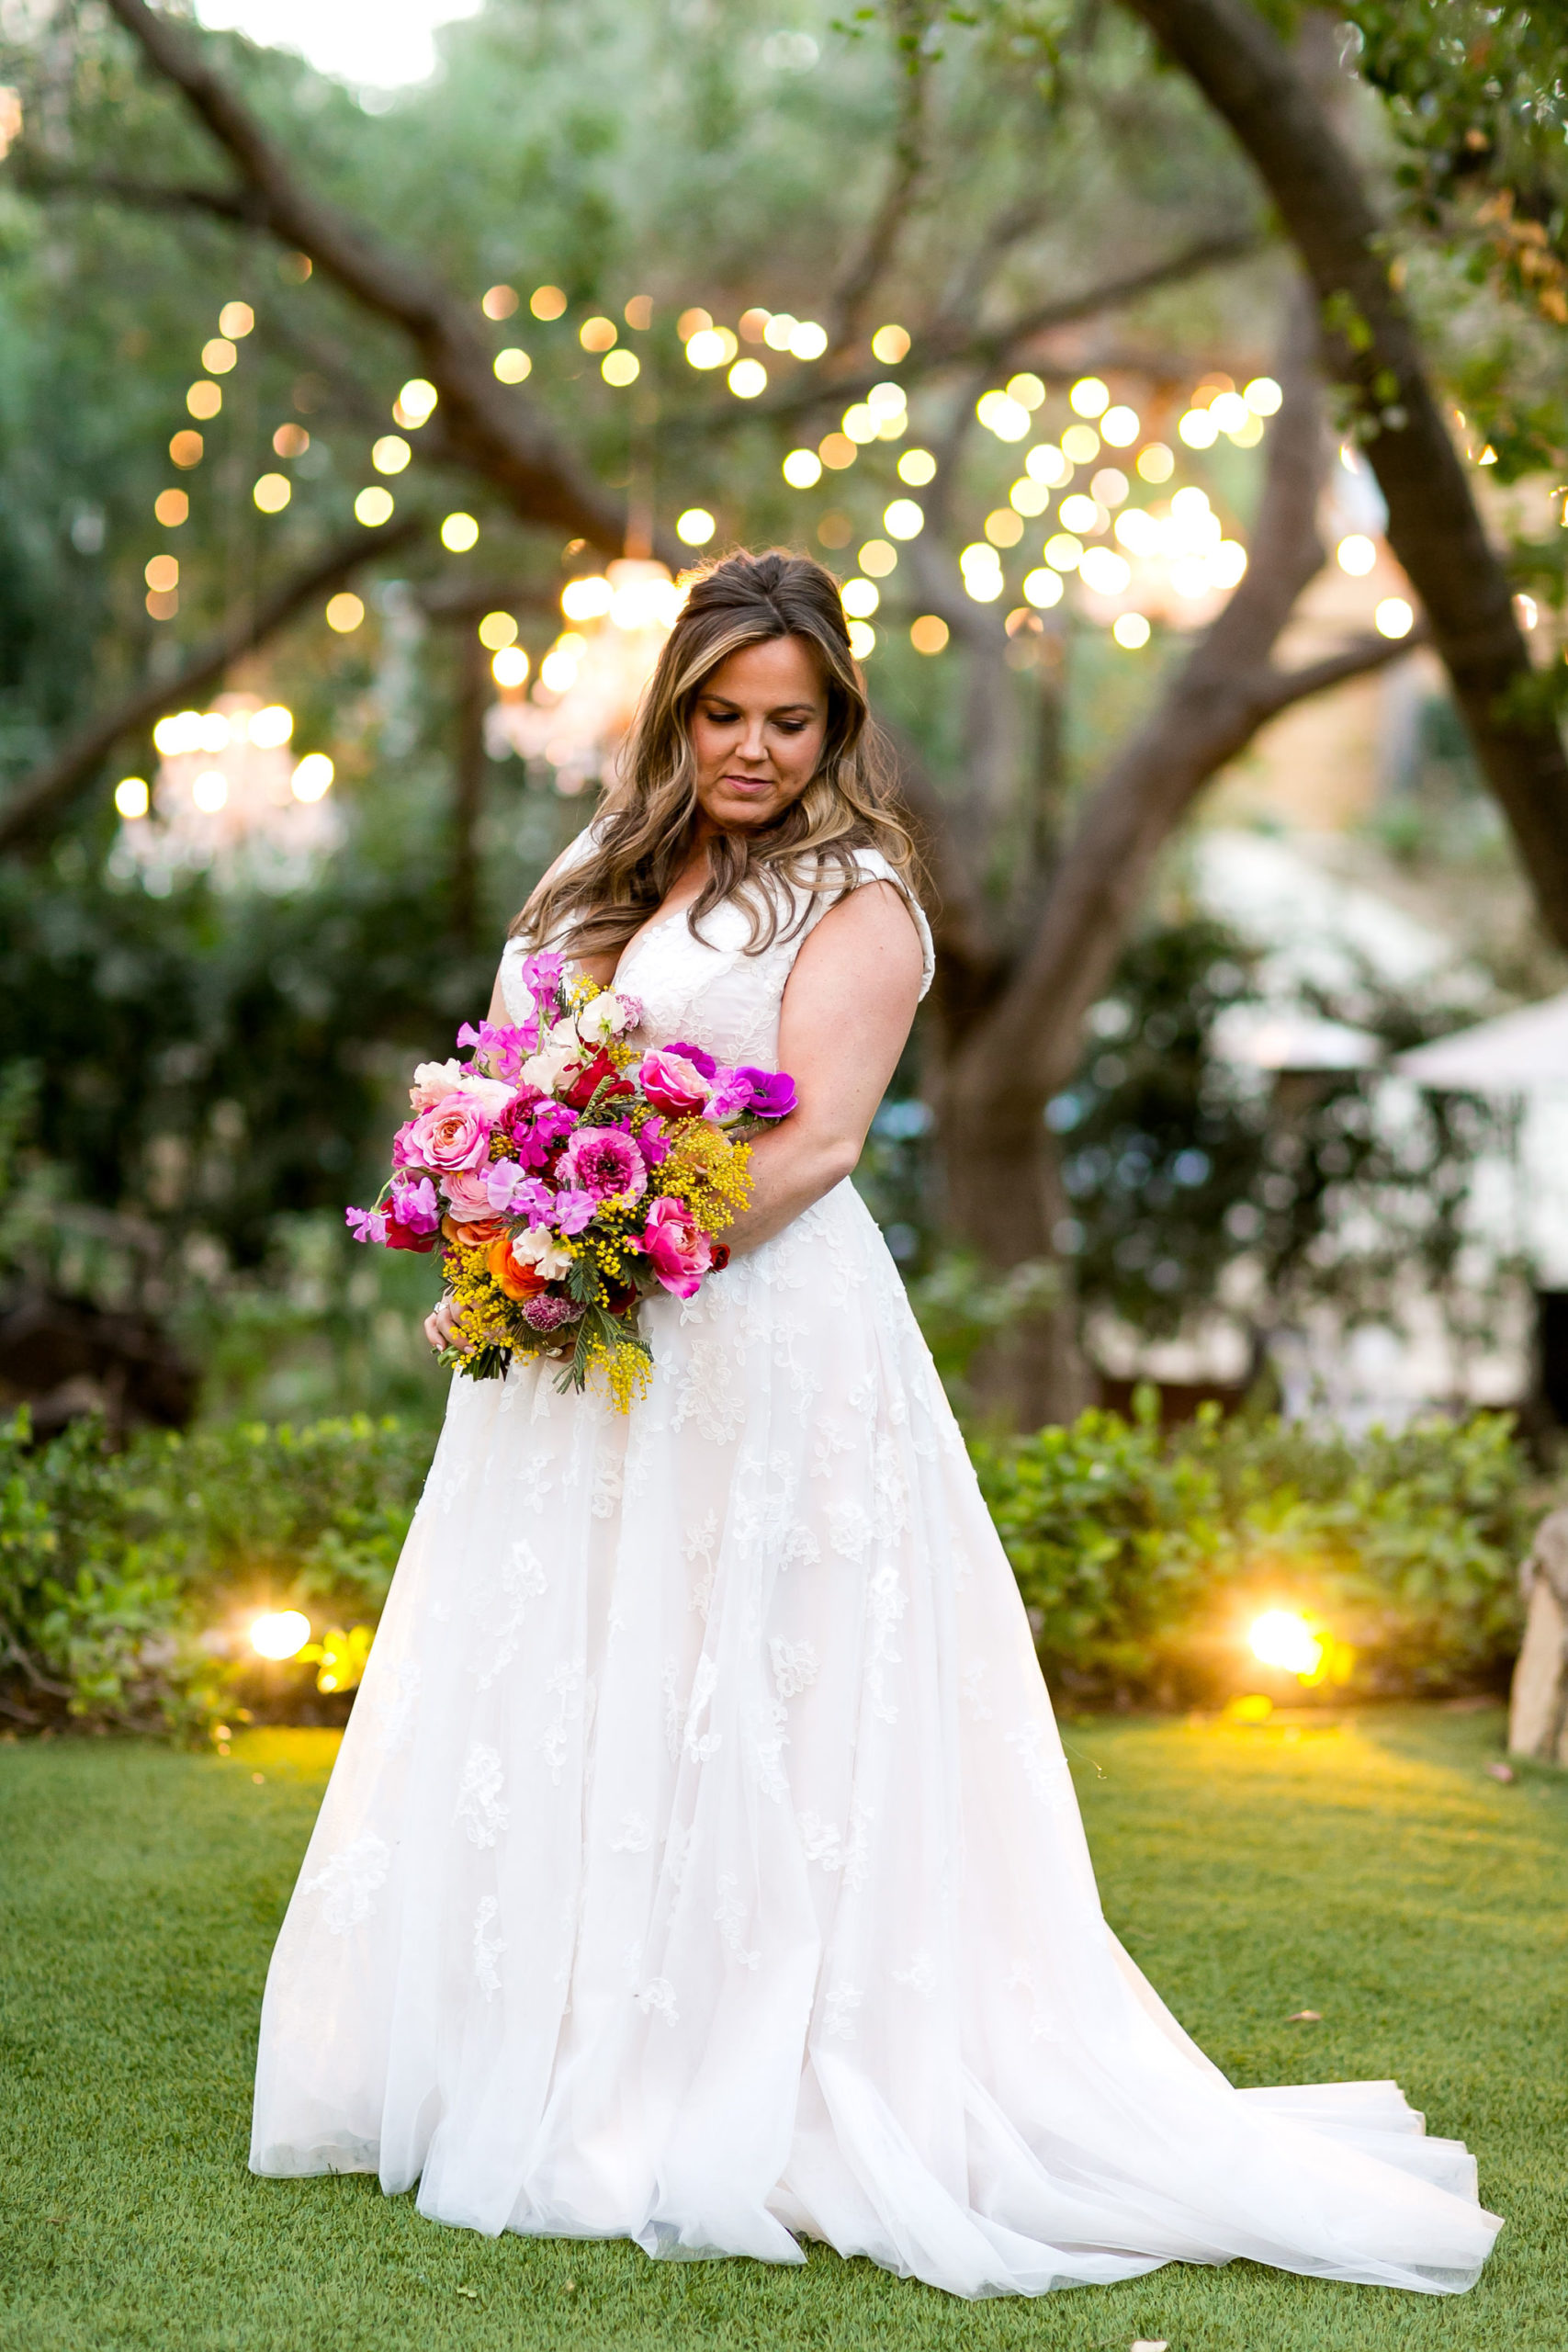 bride in v-neck wedding dress with lace overlay holding a bright purple and pink bouquet